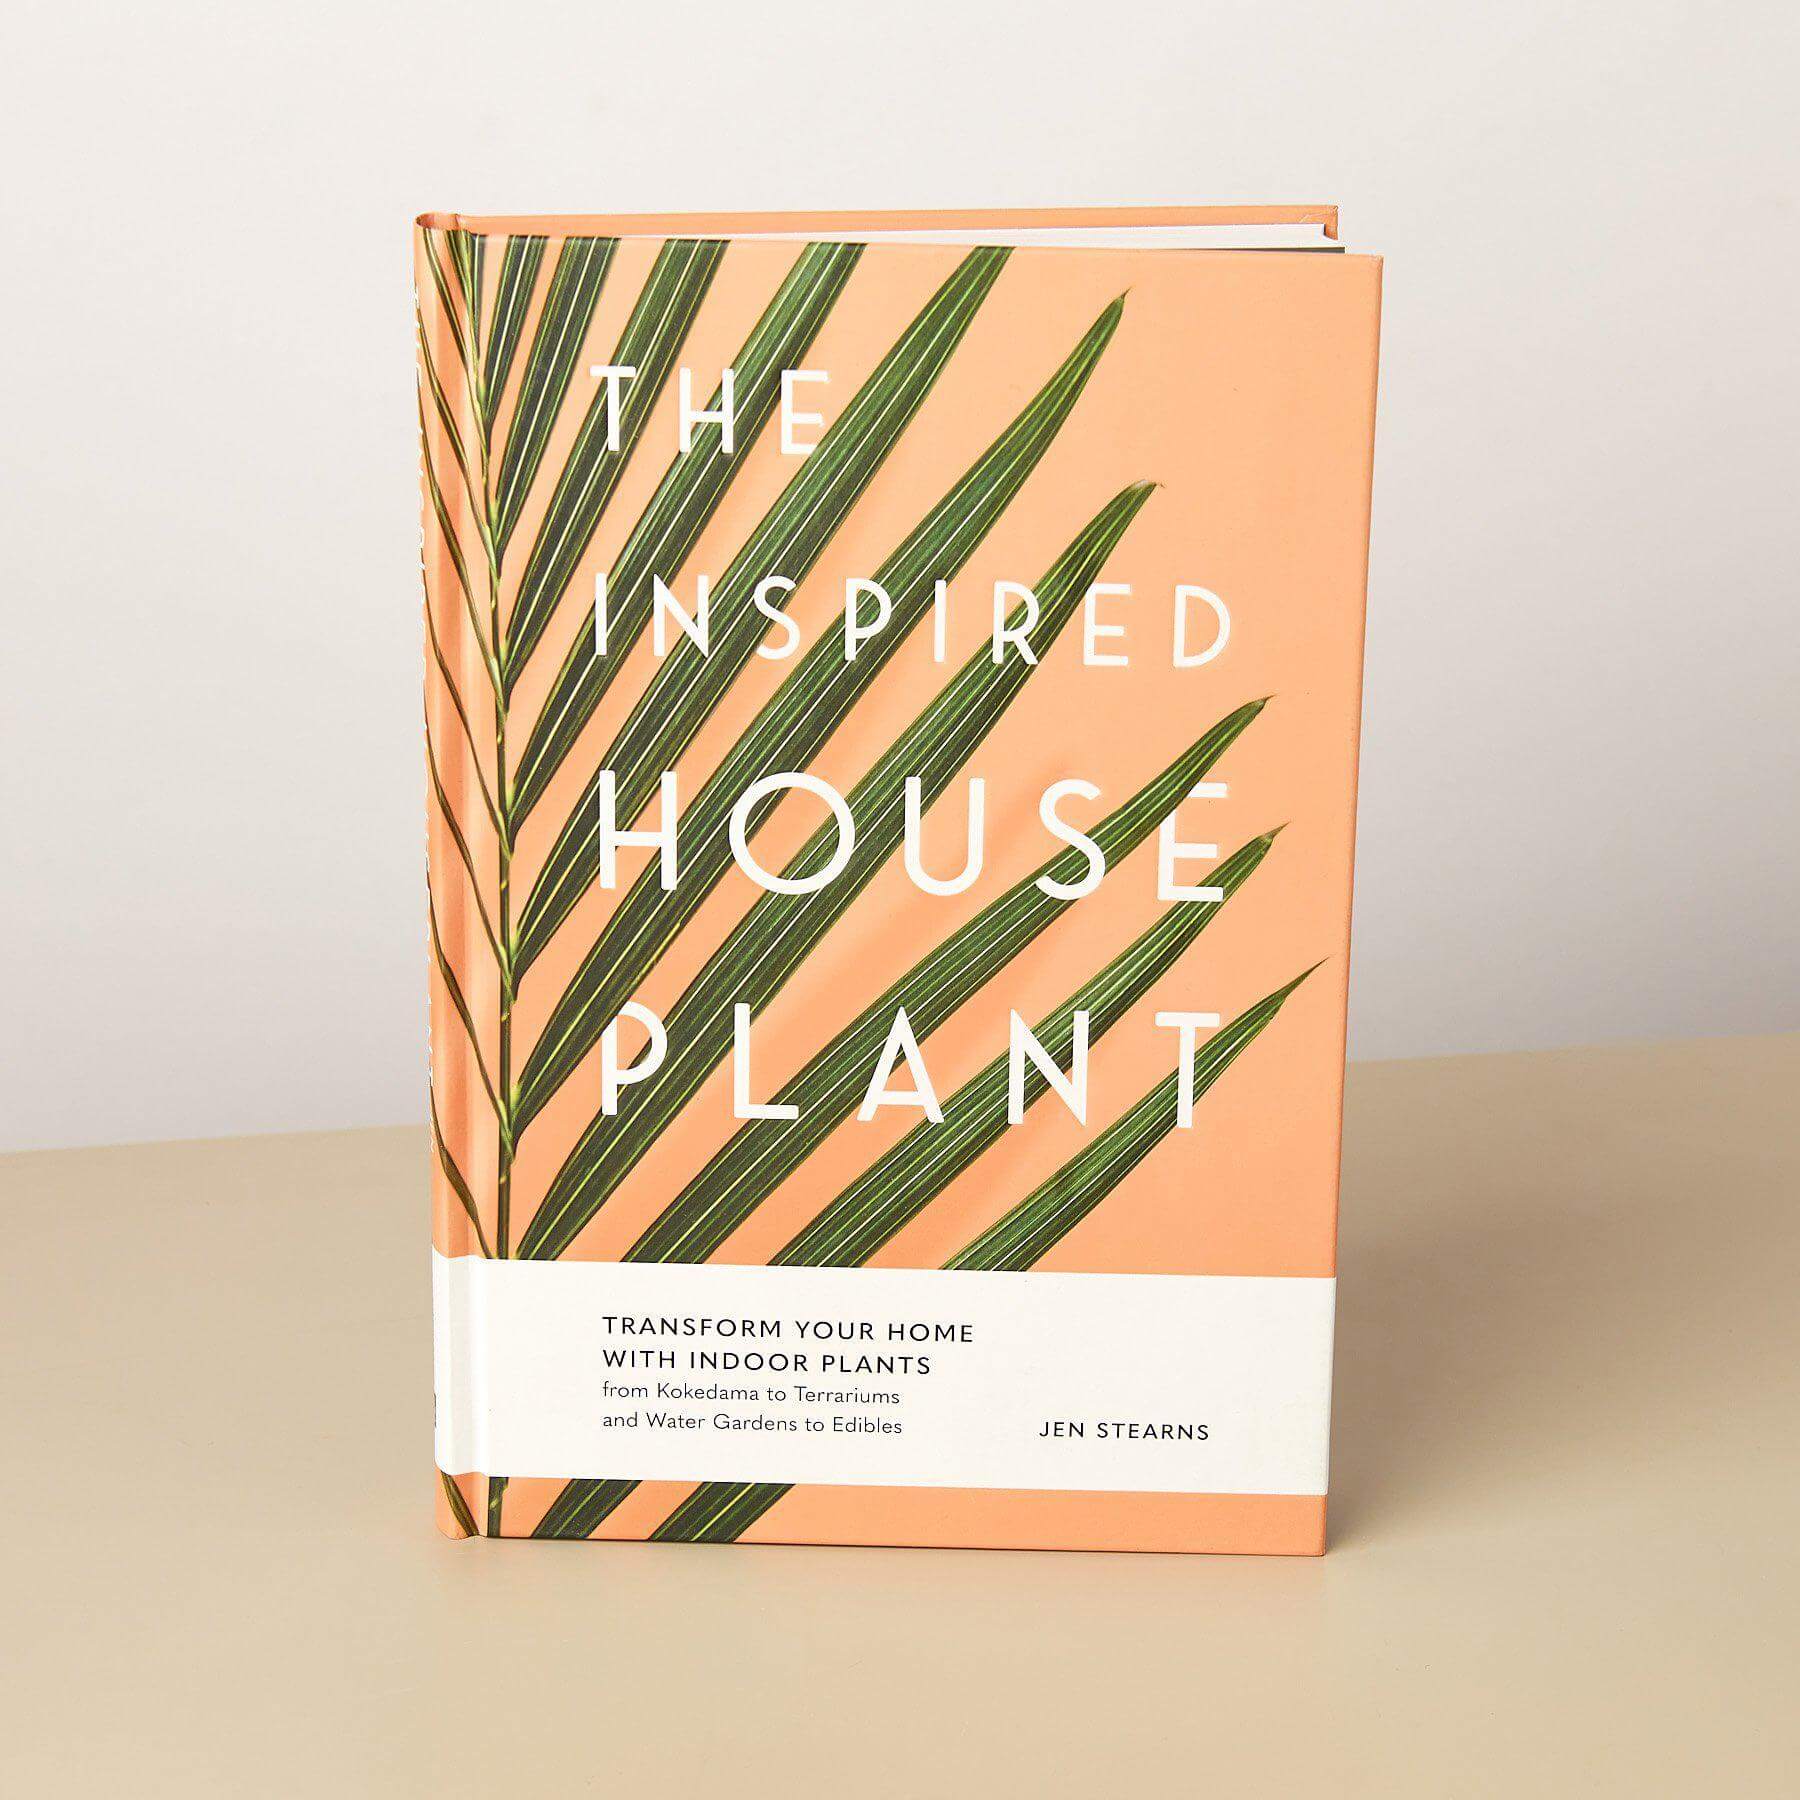 The Inspired House Plant | Modern house plants that clean the air